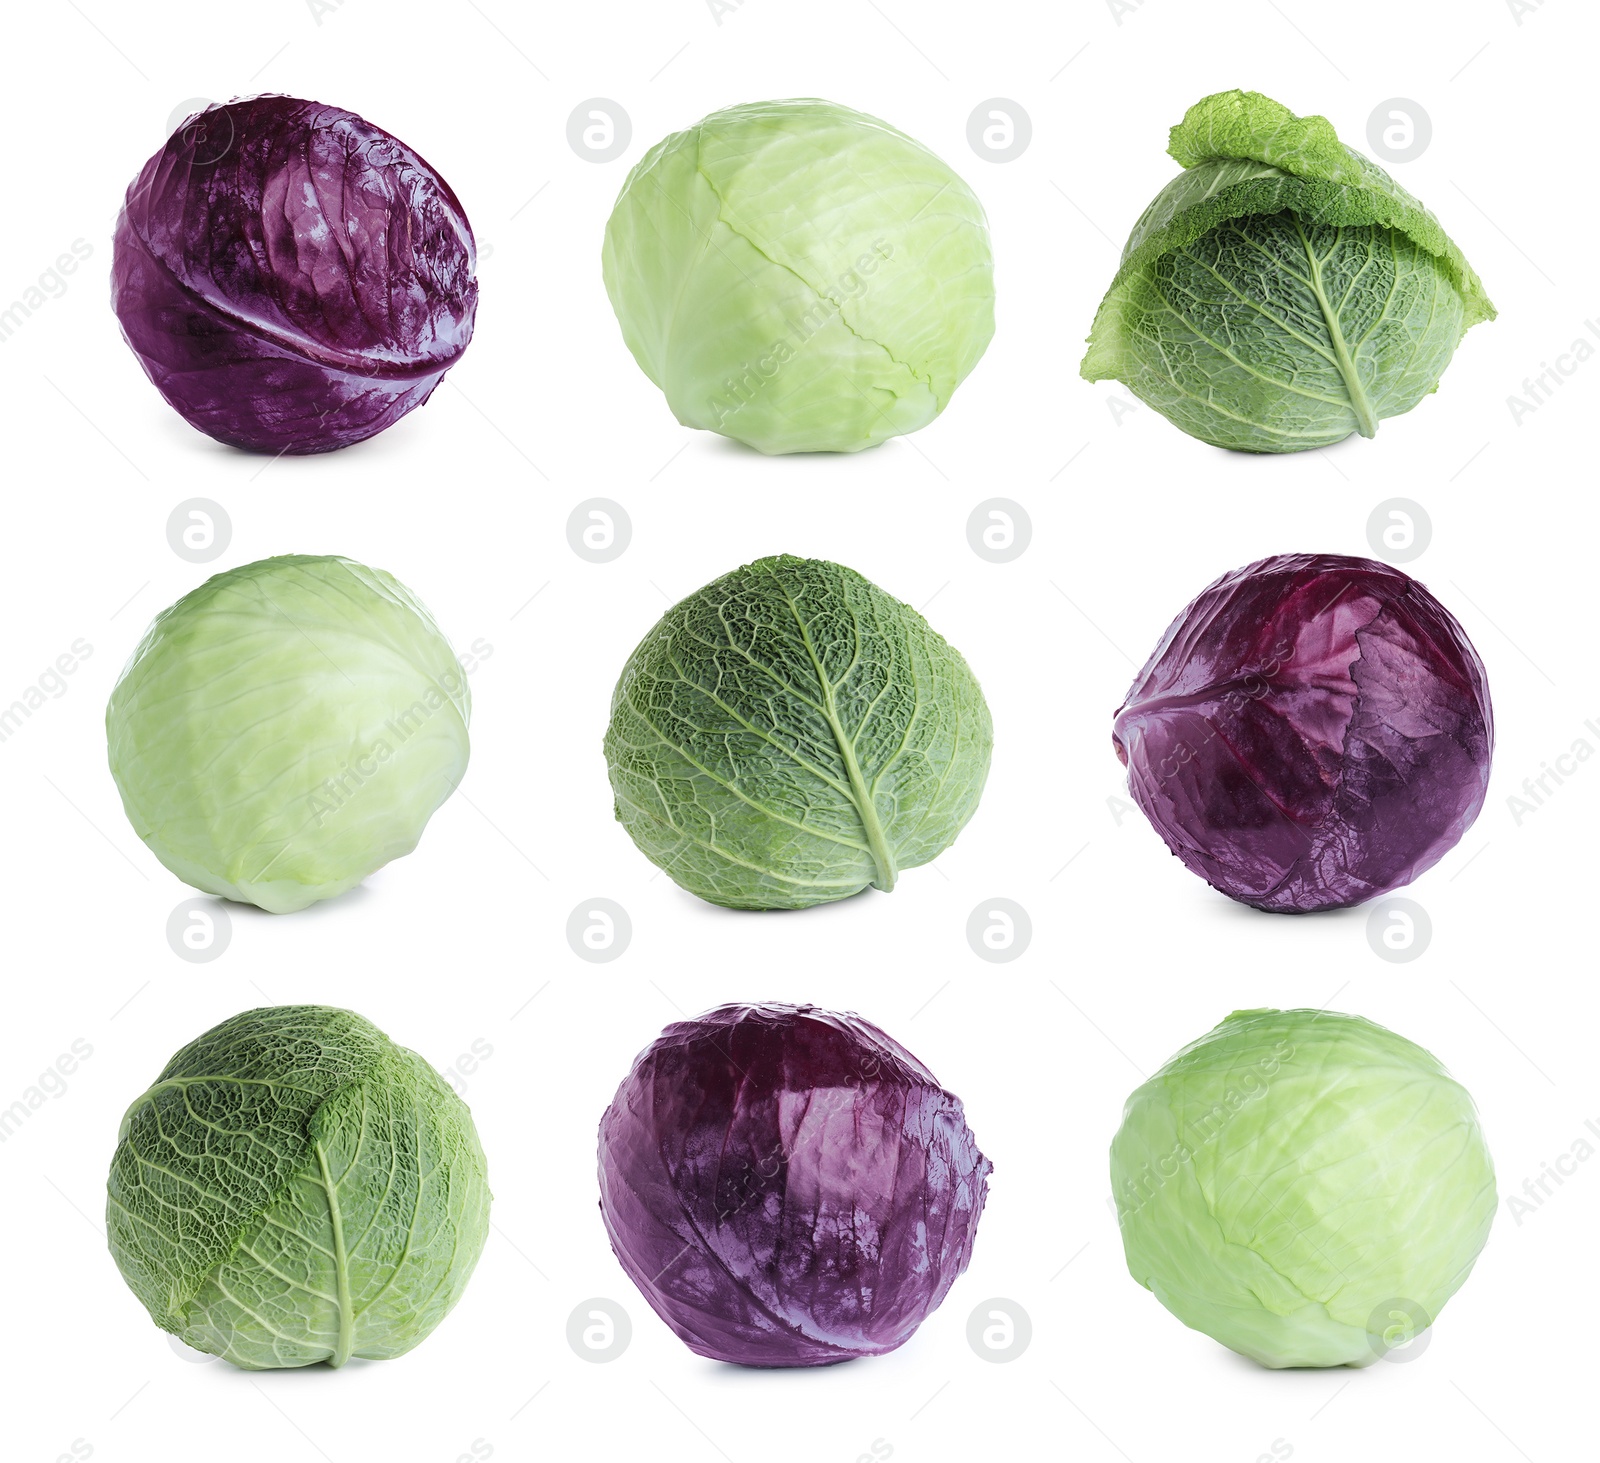 Image of Set of different fresh cabbages on white background